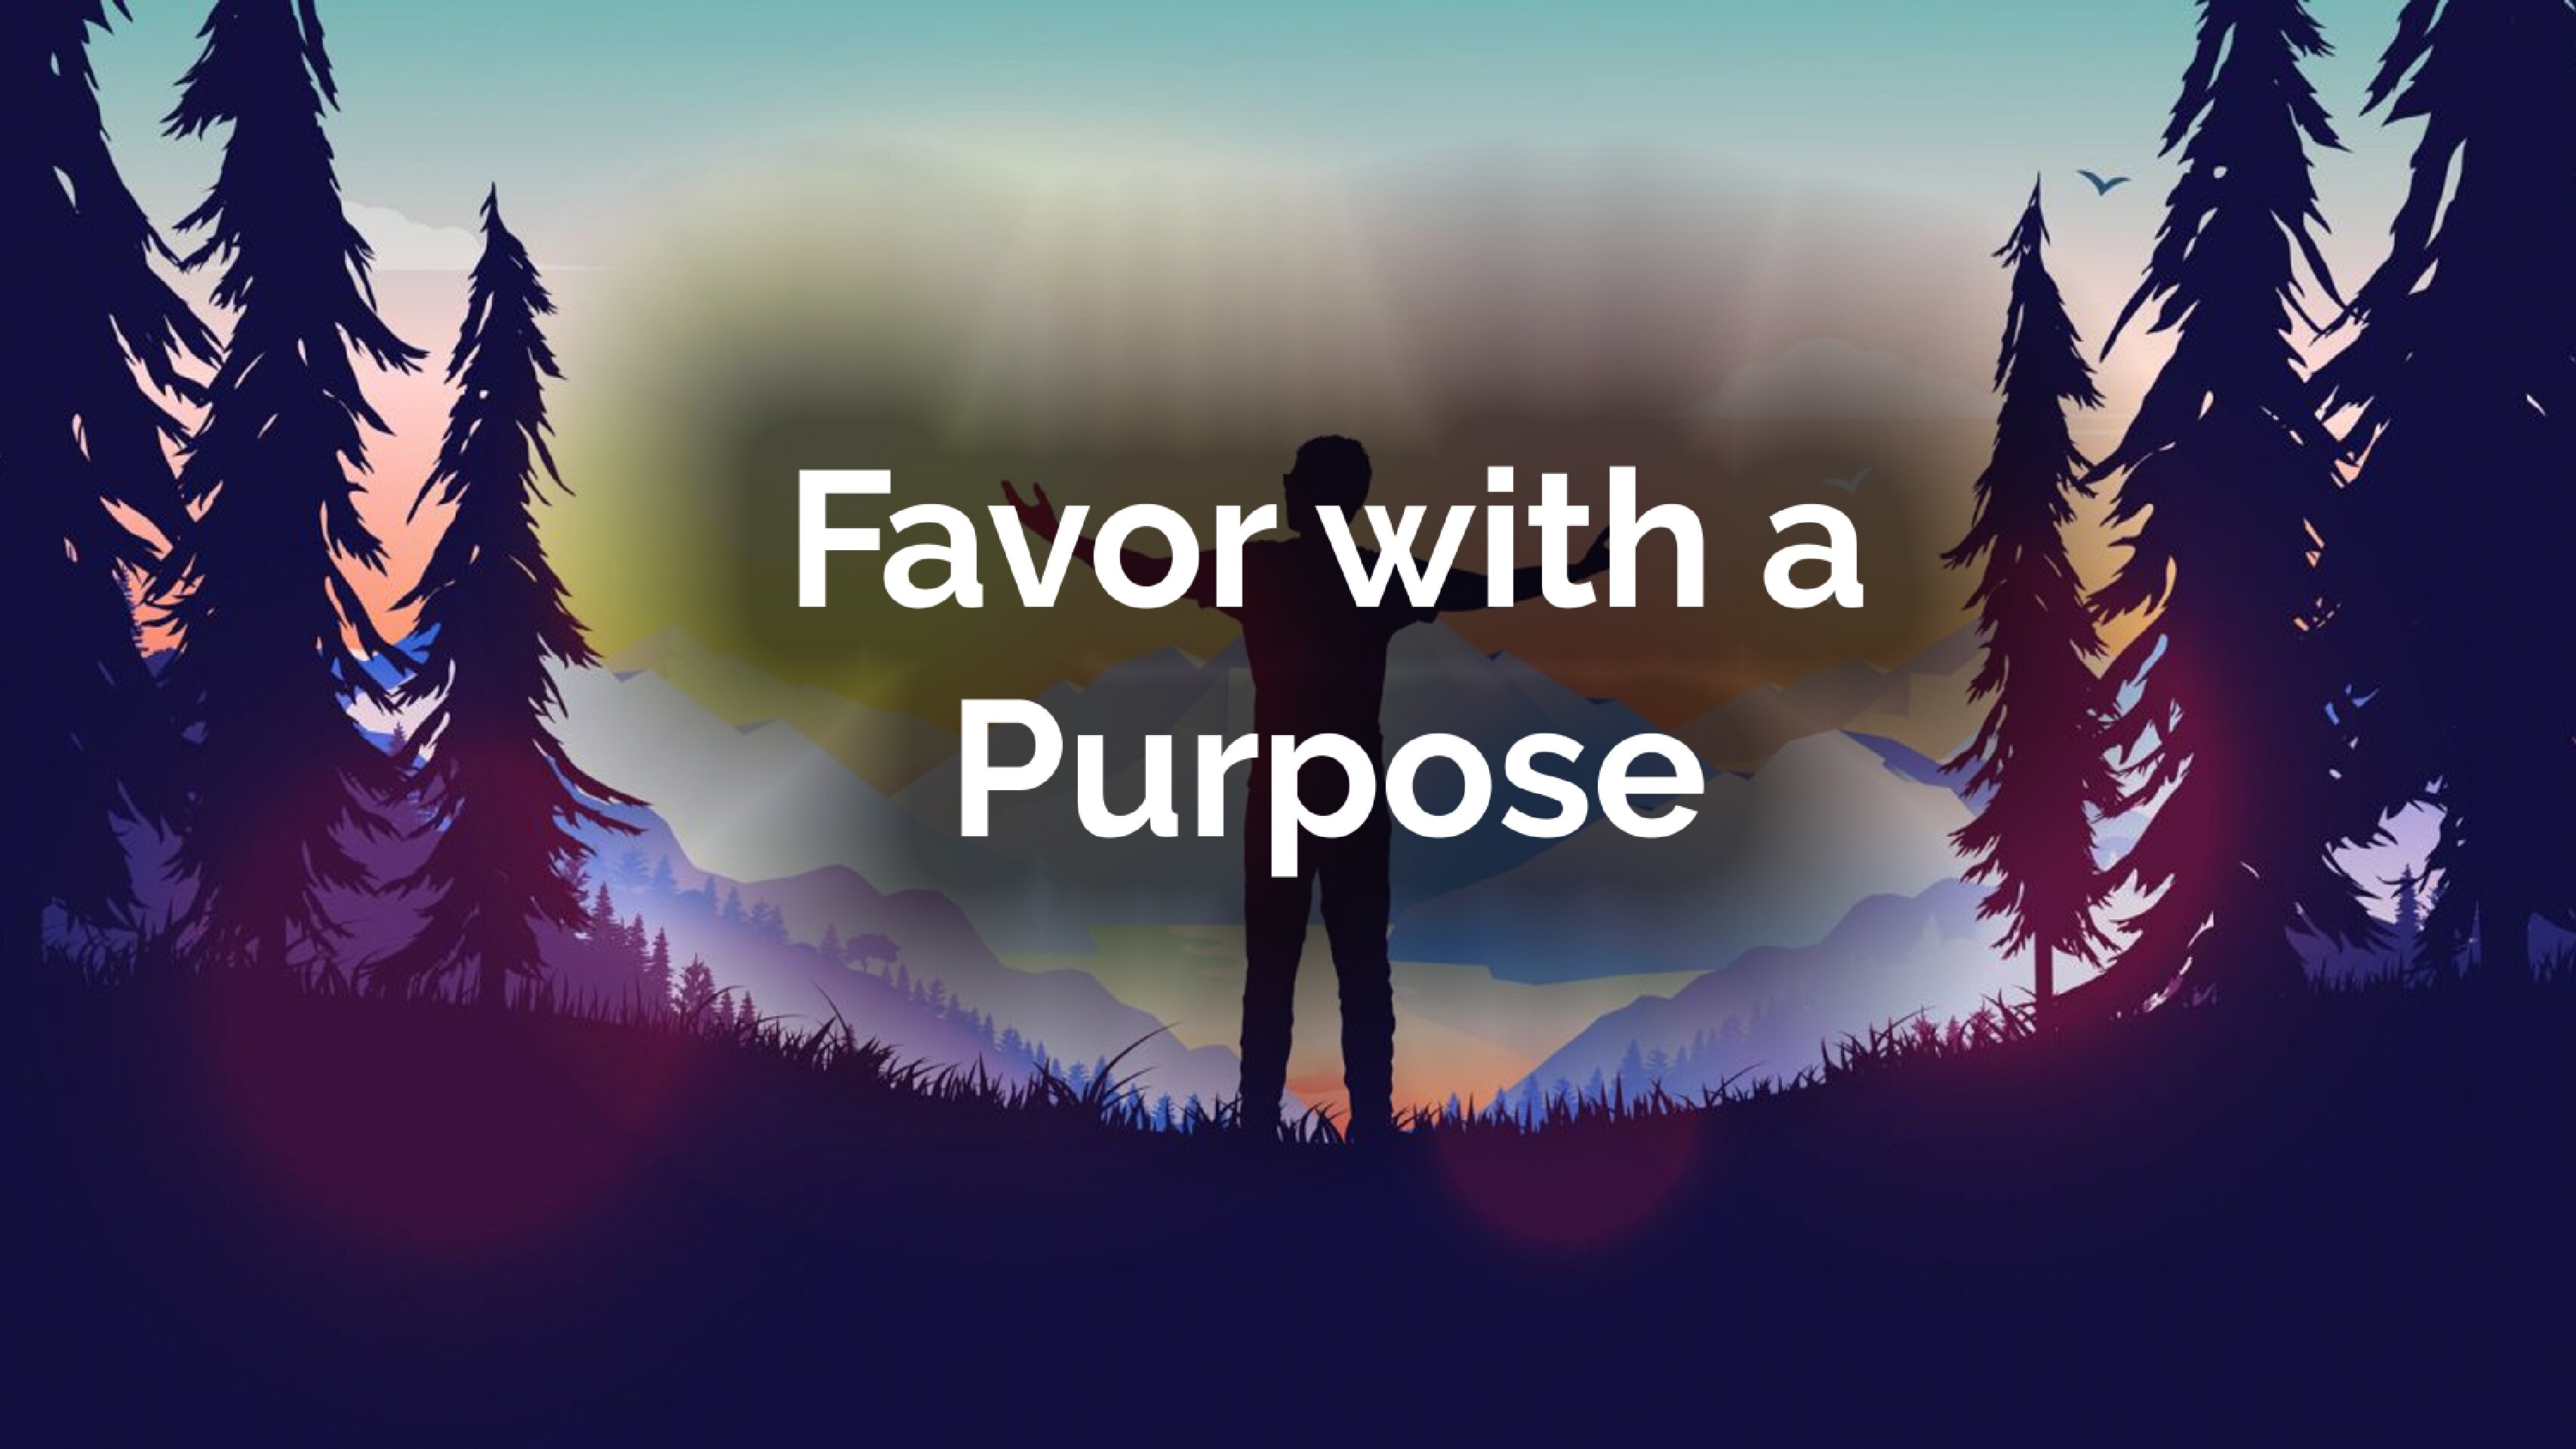 Favor with a Purpose